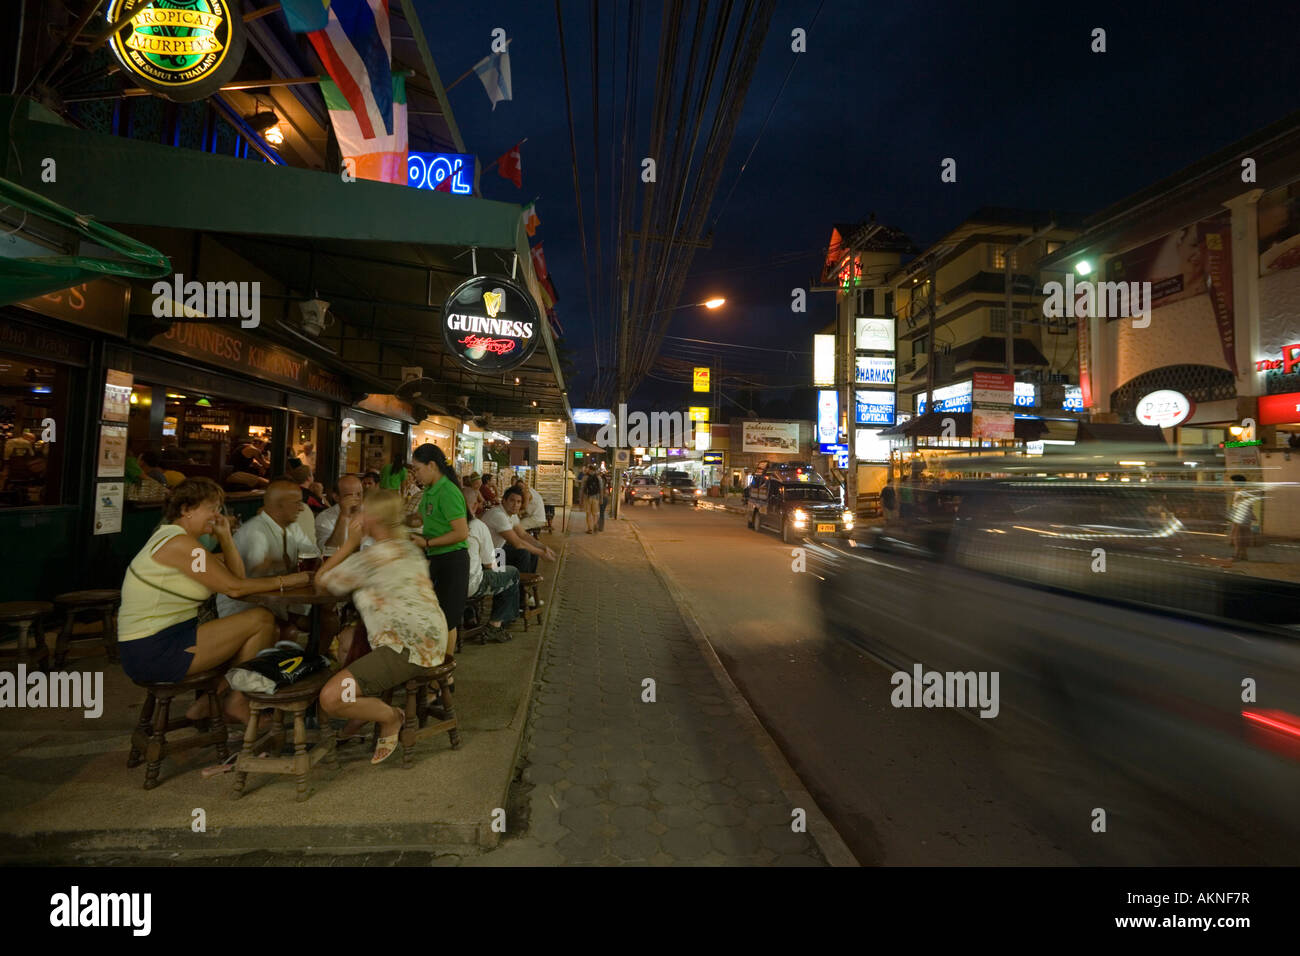 People sitting in the open air area of the Tropical Murphy s Irish Pub Chaweng Beach Hat Chaweng Central Ko Samui Thailand Stock Photo